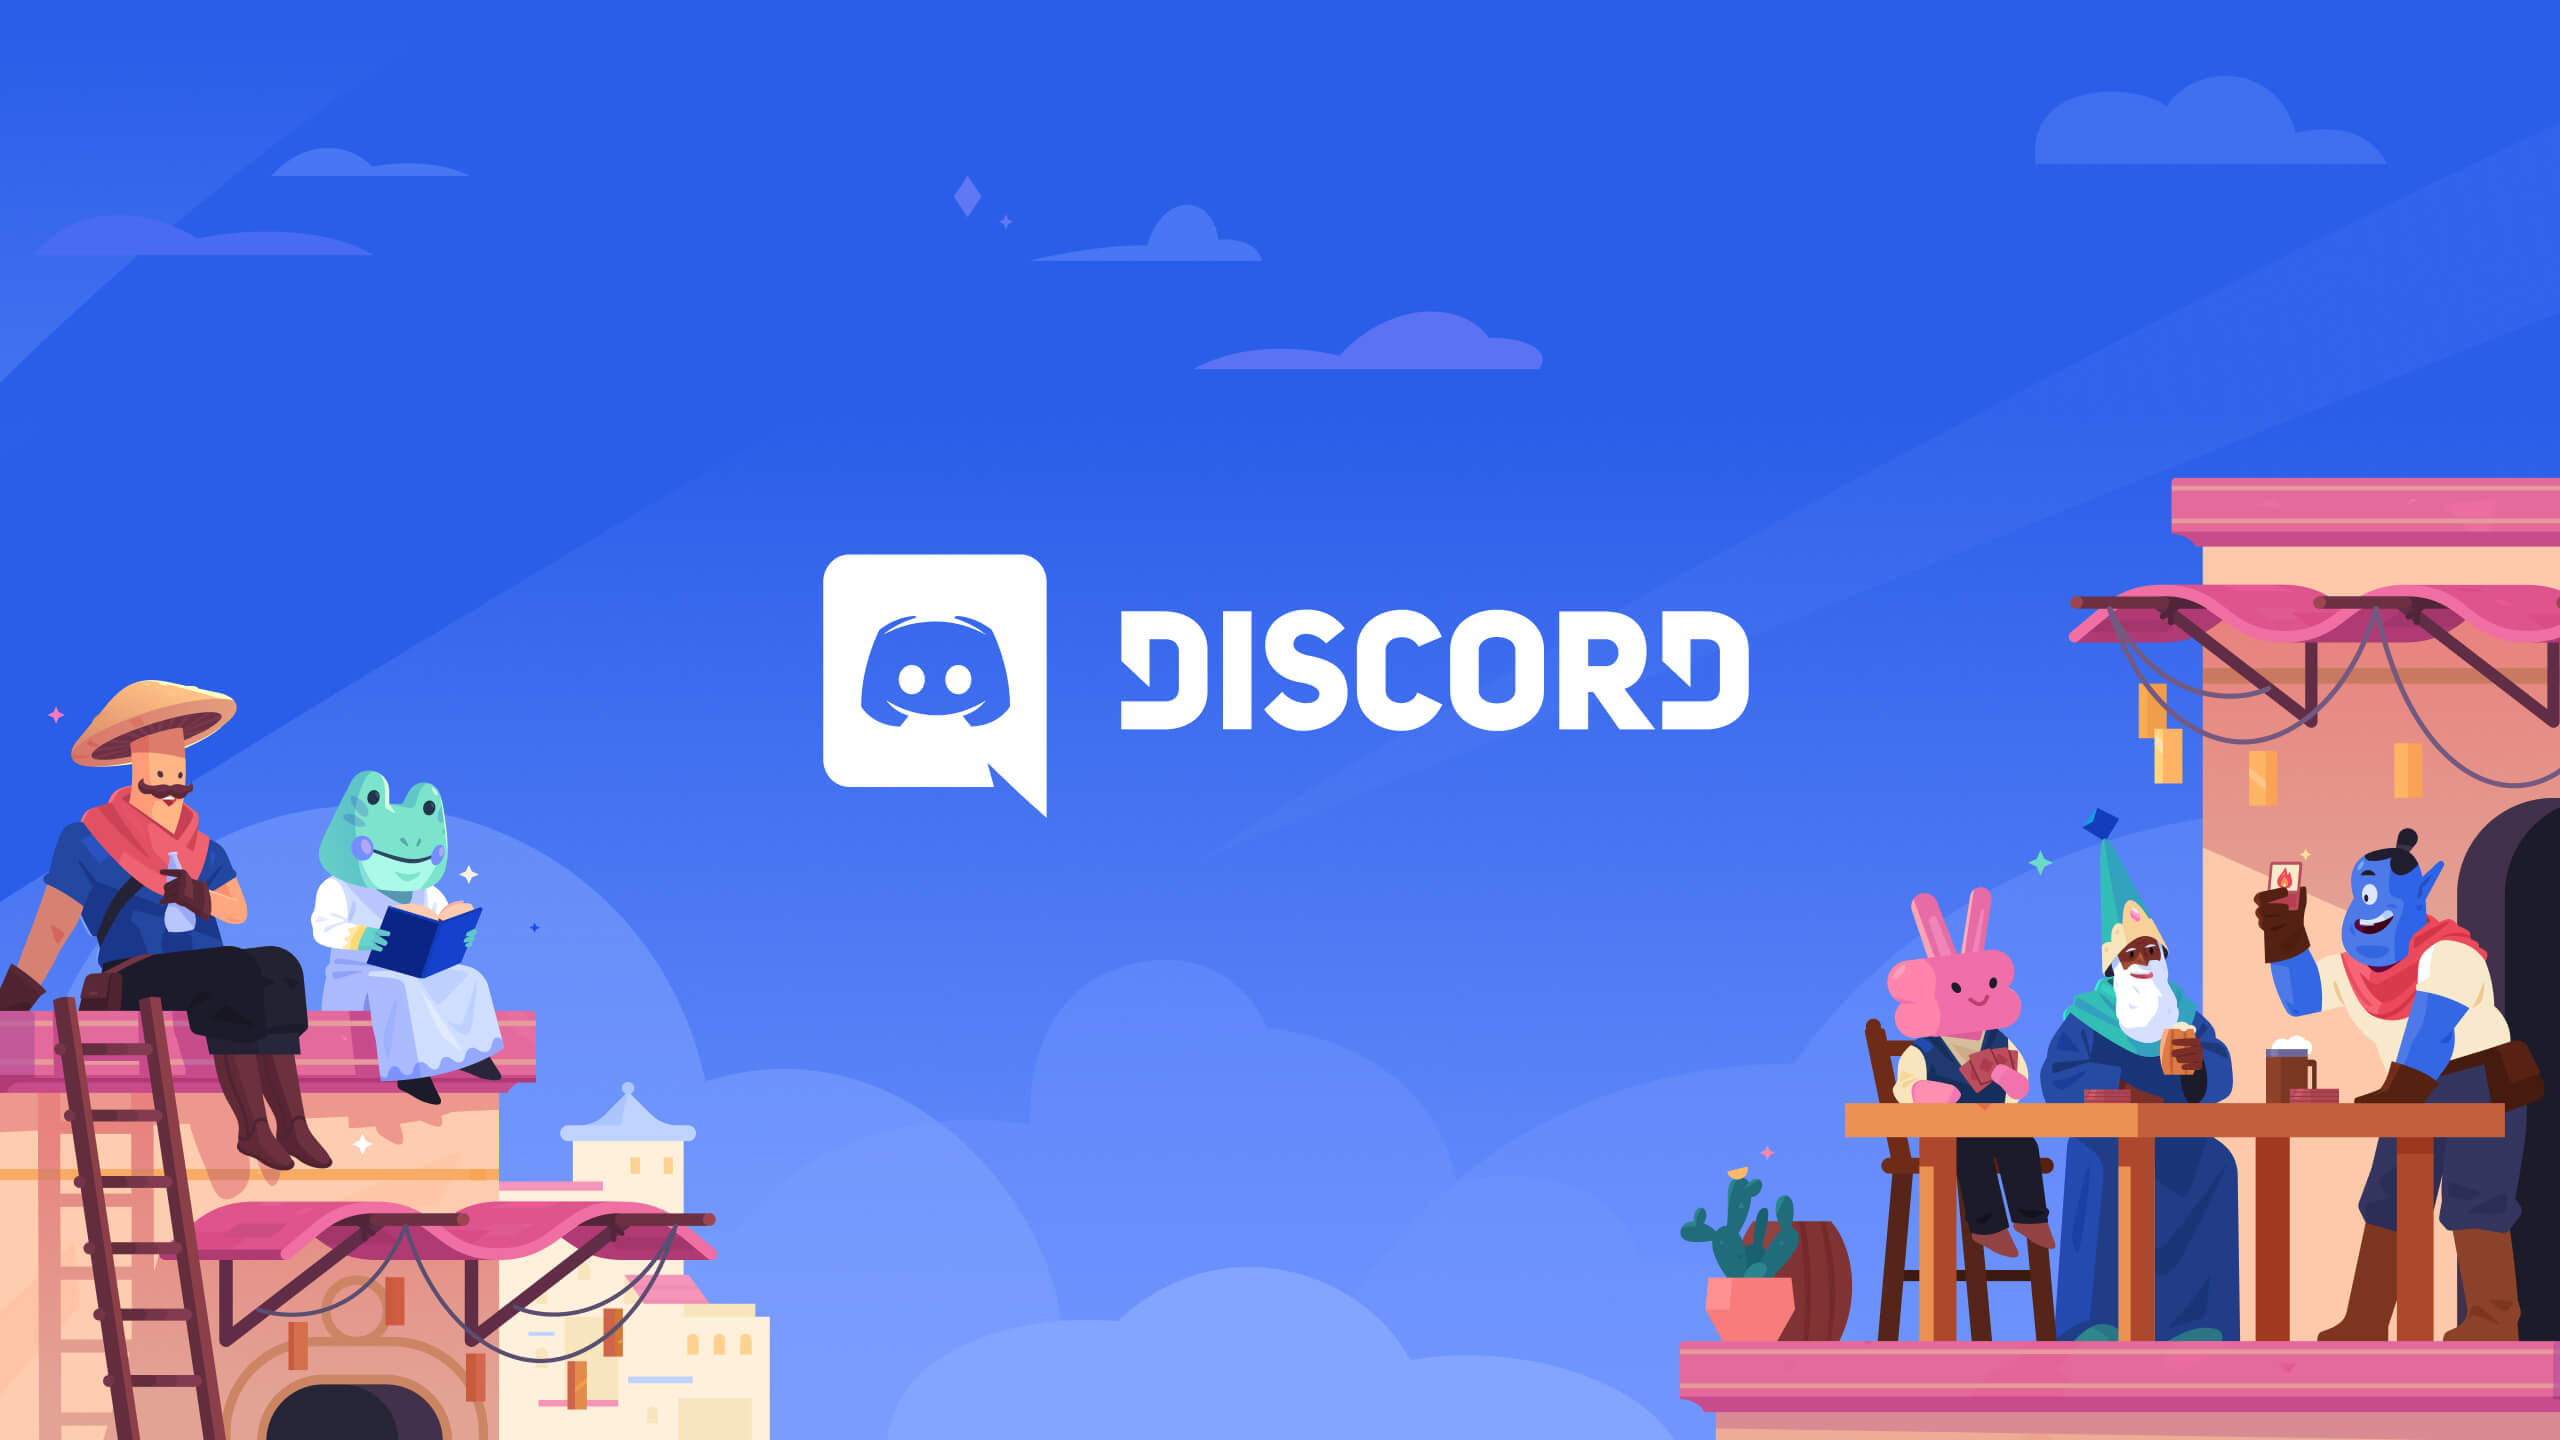 How To Link Discord To Epic Games